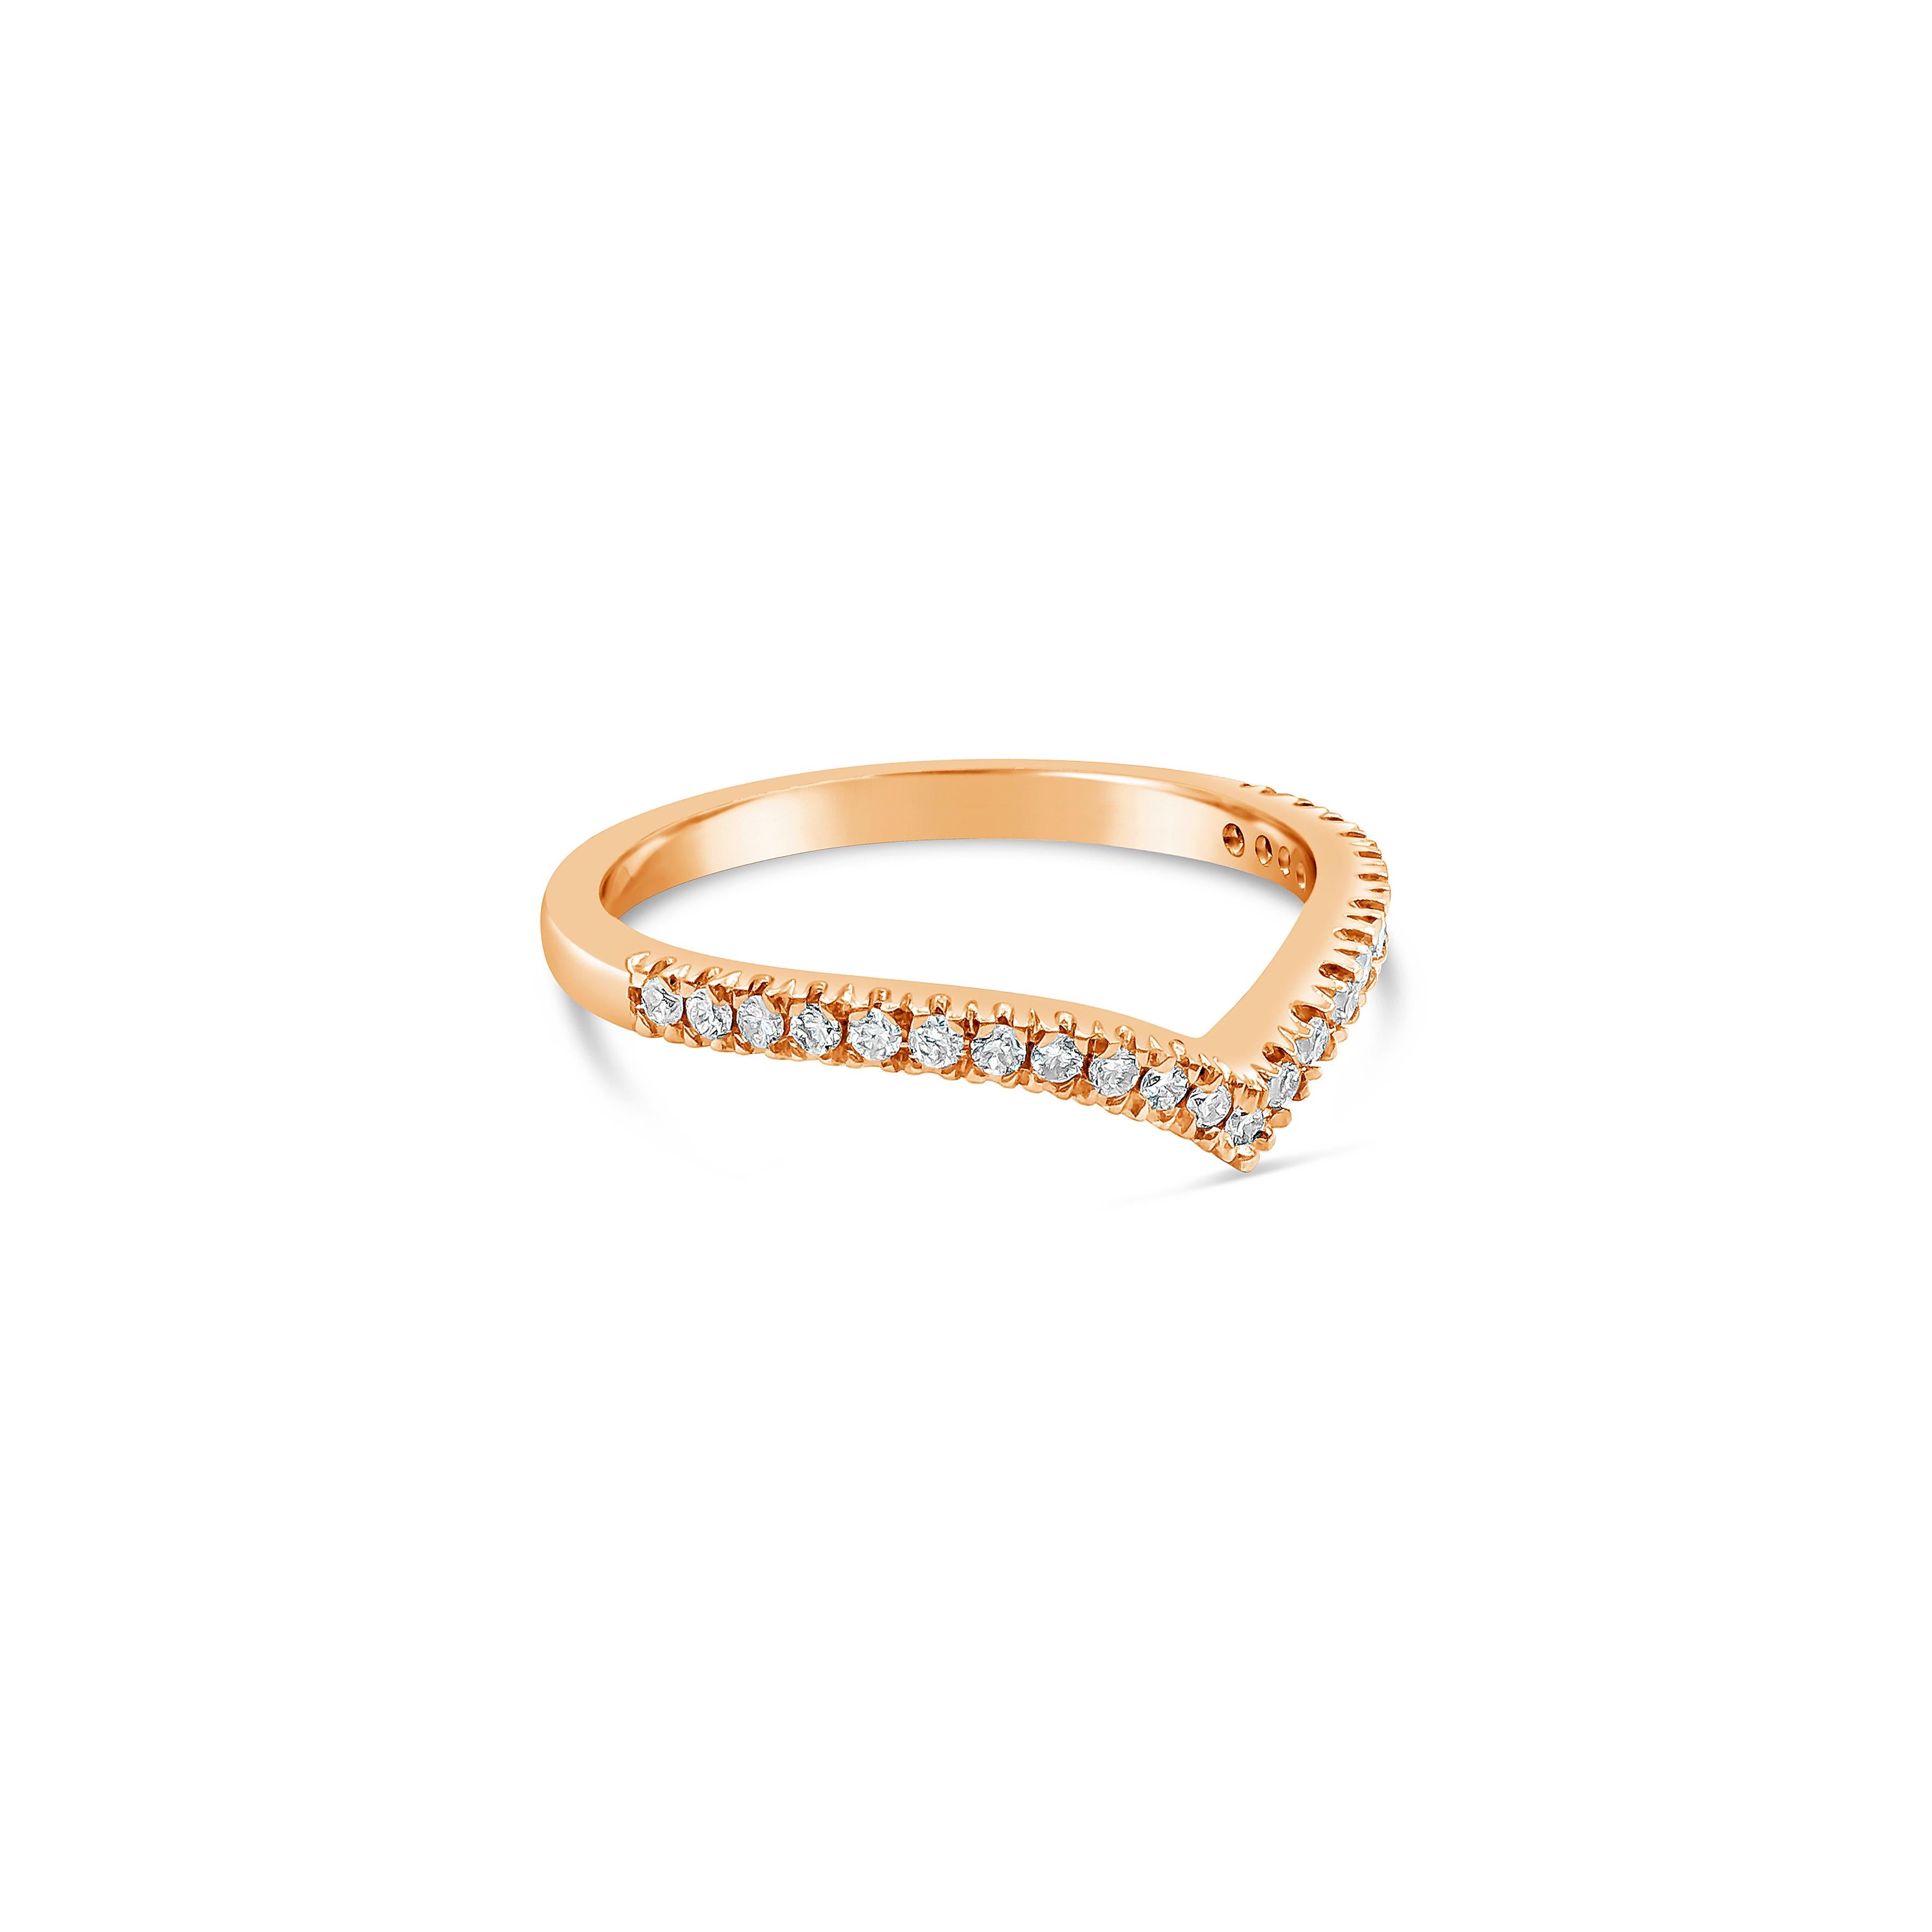 A modern wedding band style that can stack with an engagement ring. Set with 0.22 carats total of round brilliant diamonds along a V-shaped mounting. Made with 18K Rose Gold. Size 6.75 US resizable upon request.

Roman Malakov is a custom house,